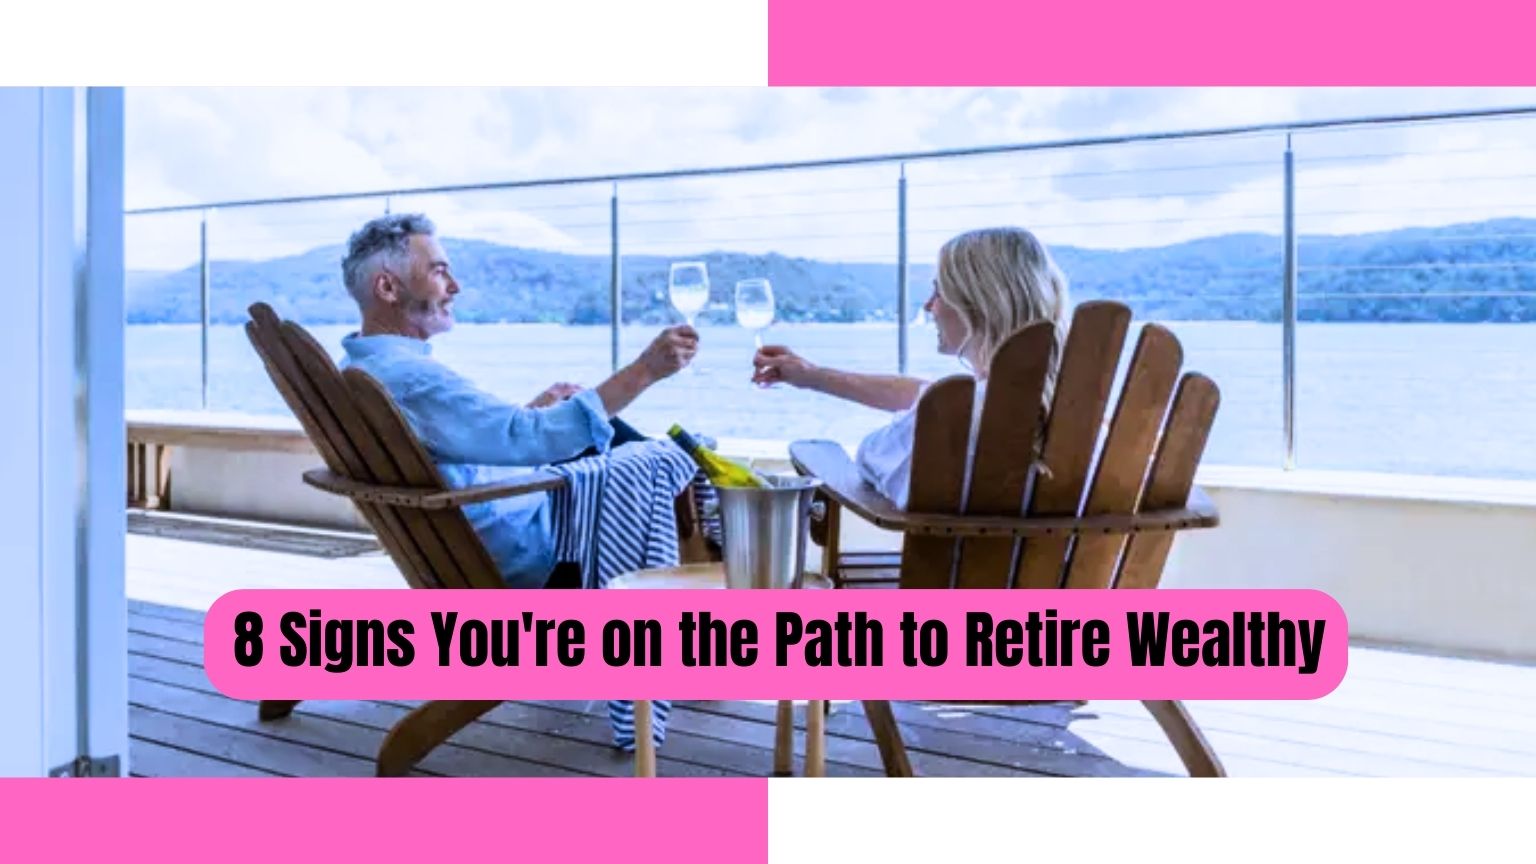 retire wealthy, how to retire wealthy,8 Signs You’ll Retire Wealthy